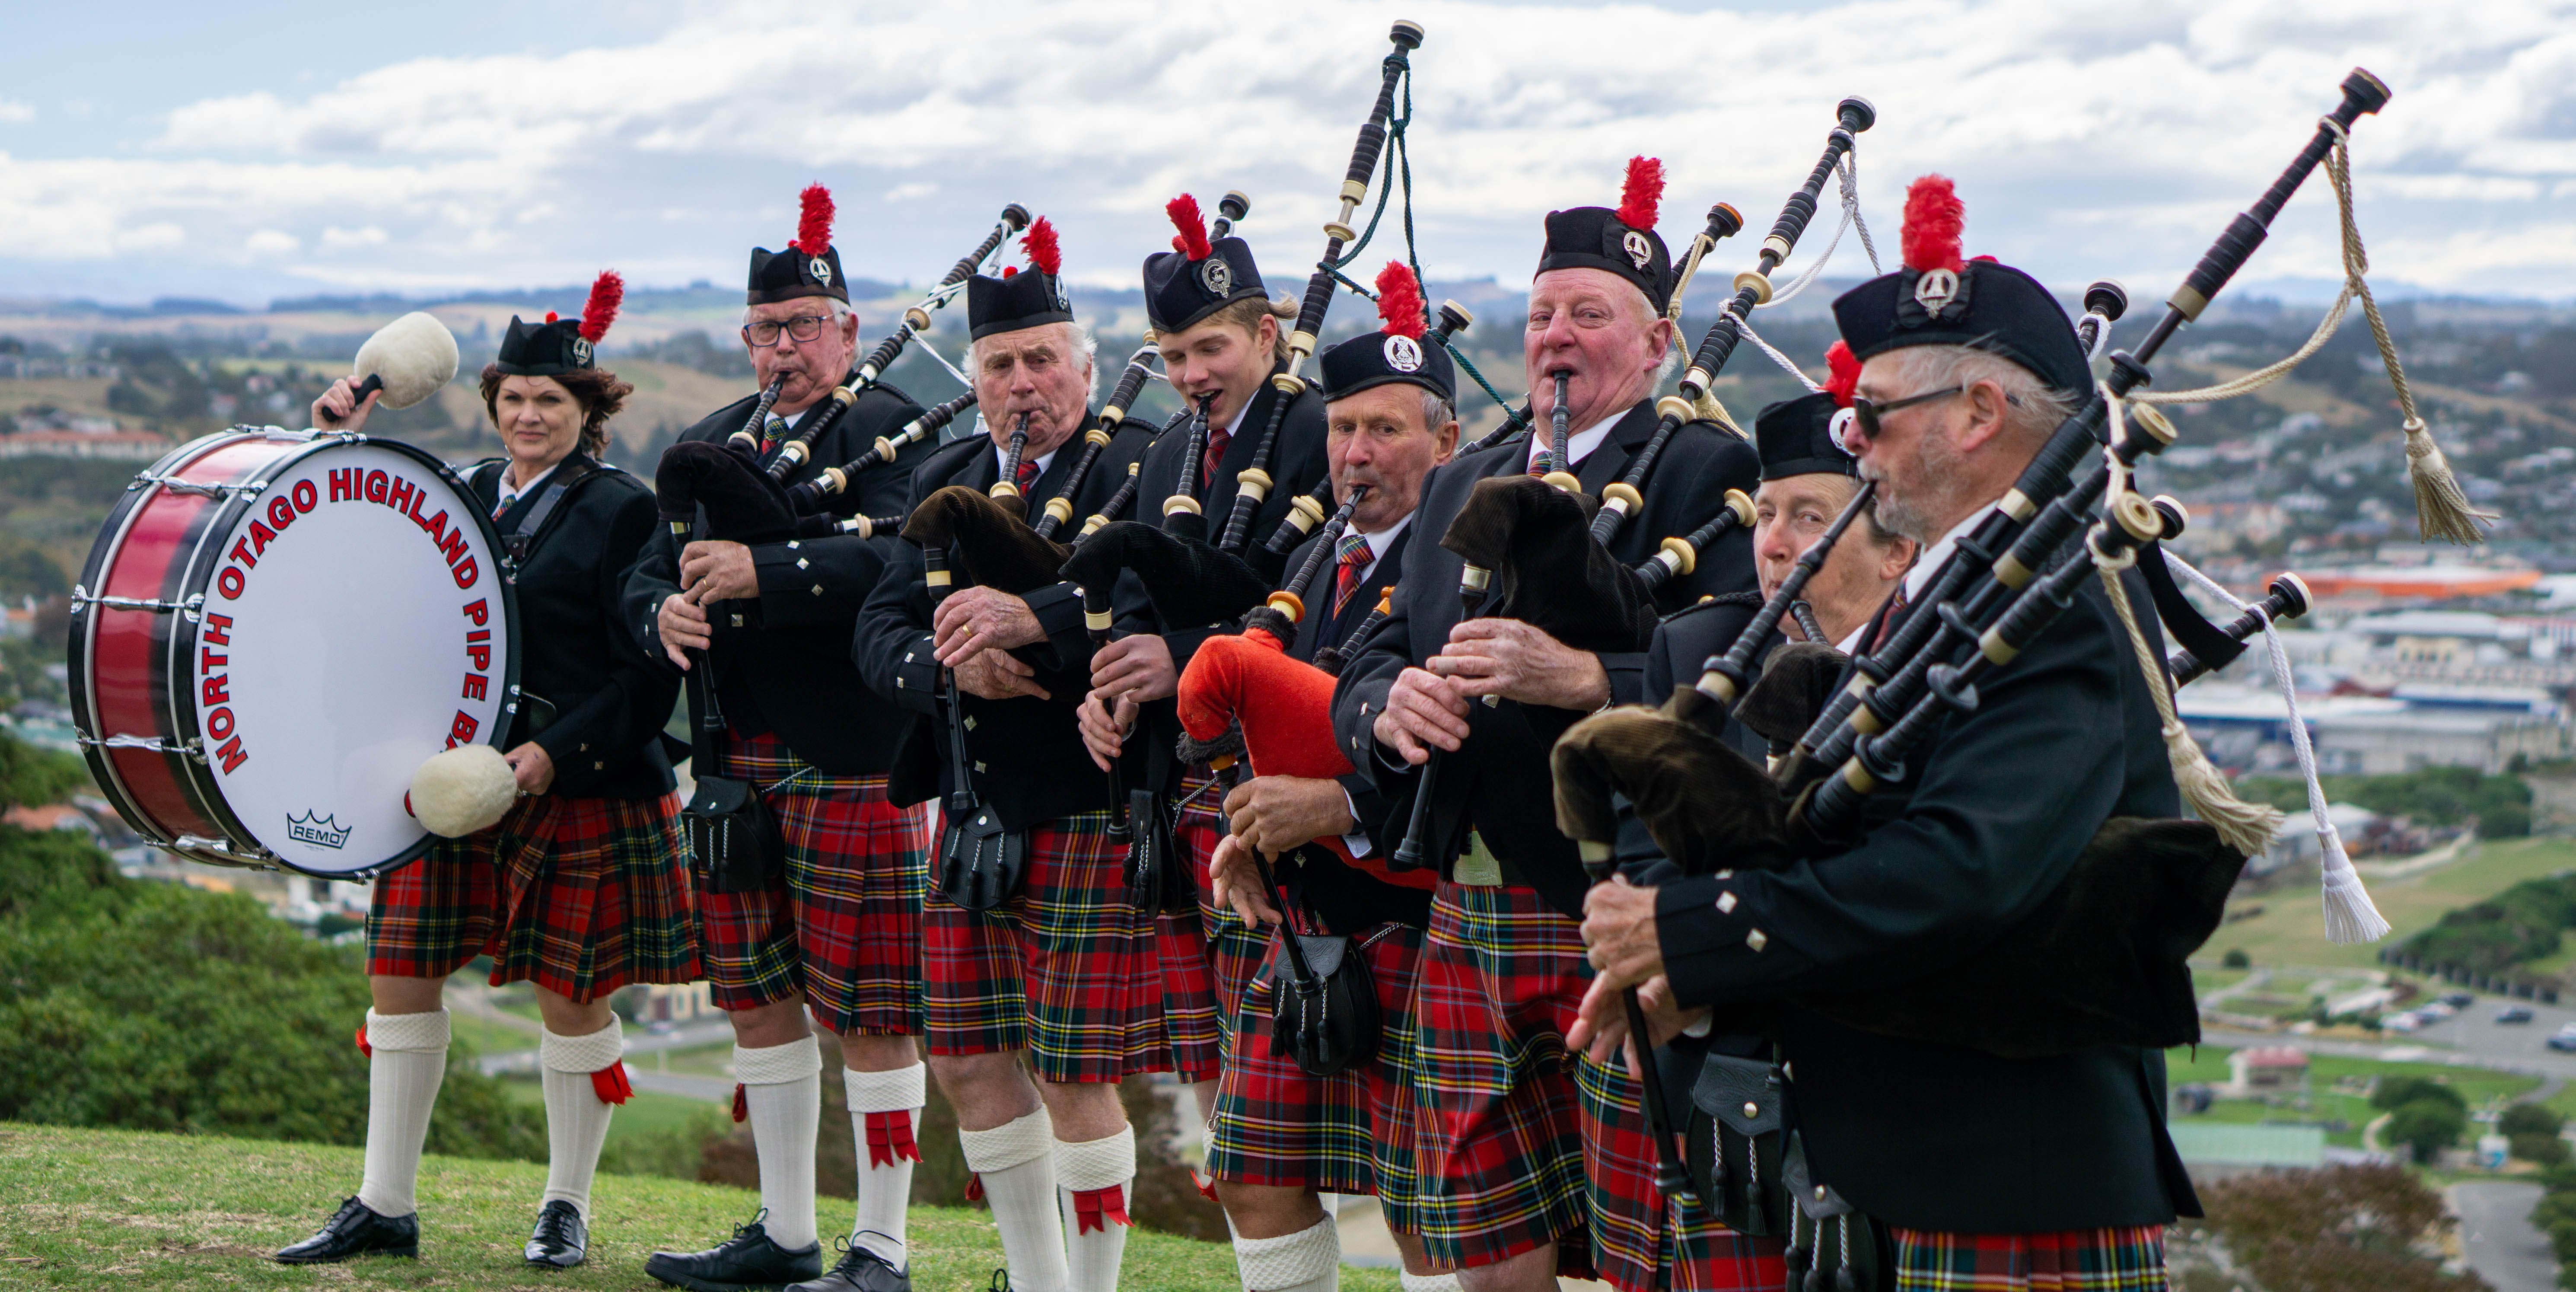 Playing atop Lookout Point are North Otago Highland Pipe Band members (from left): Priscilla...